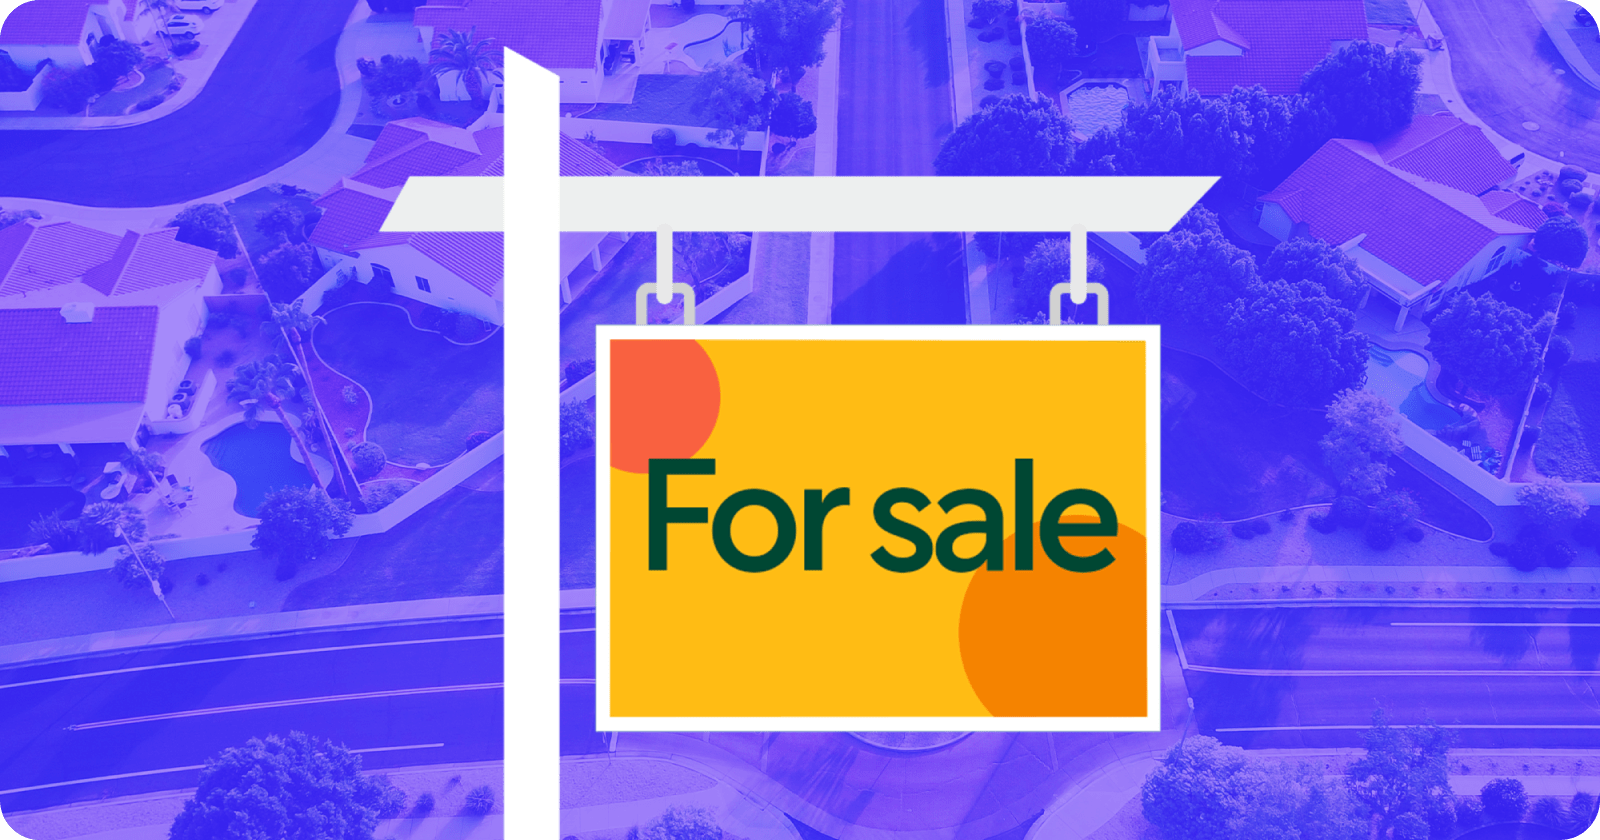 "Illustration of neighborhood with For Sale sign in yellow